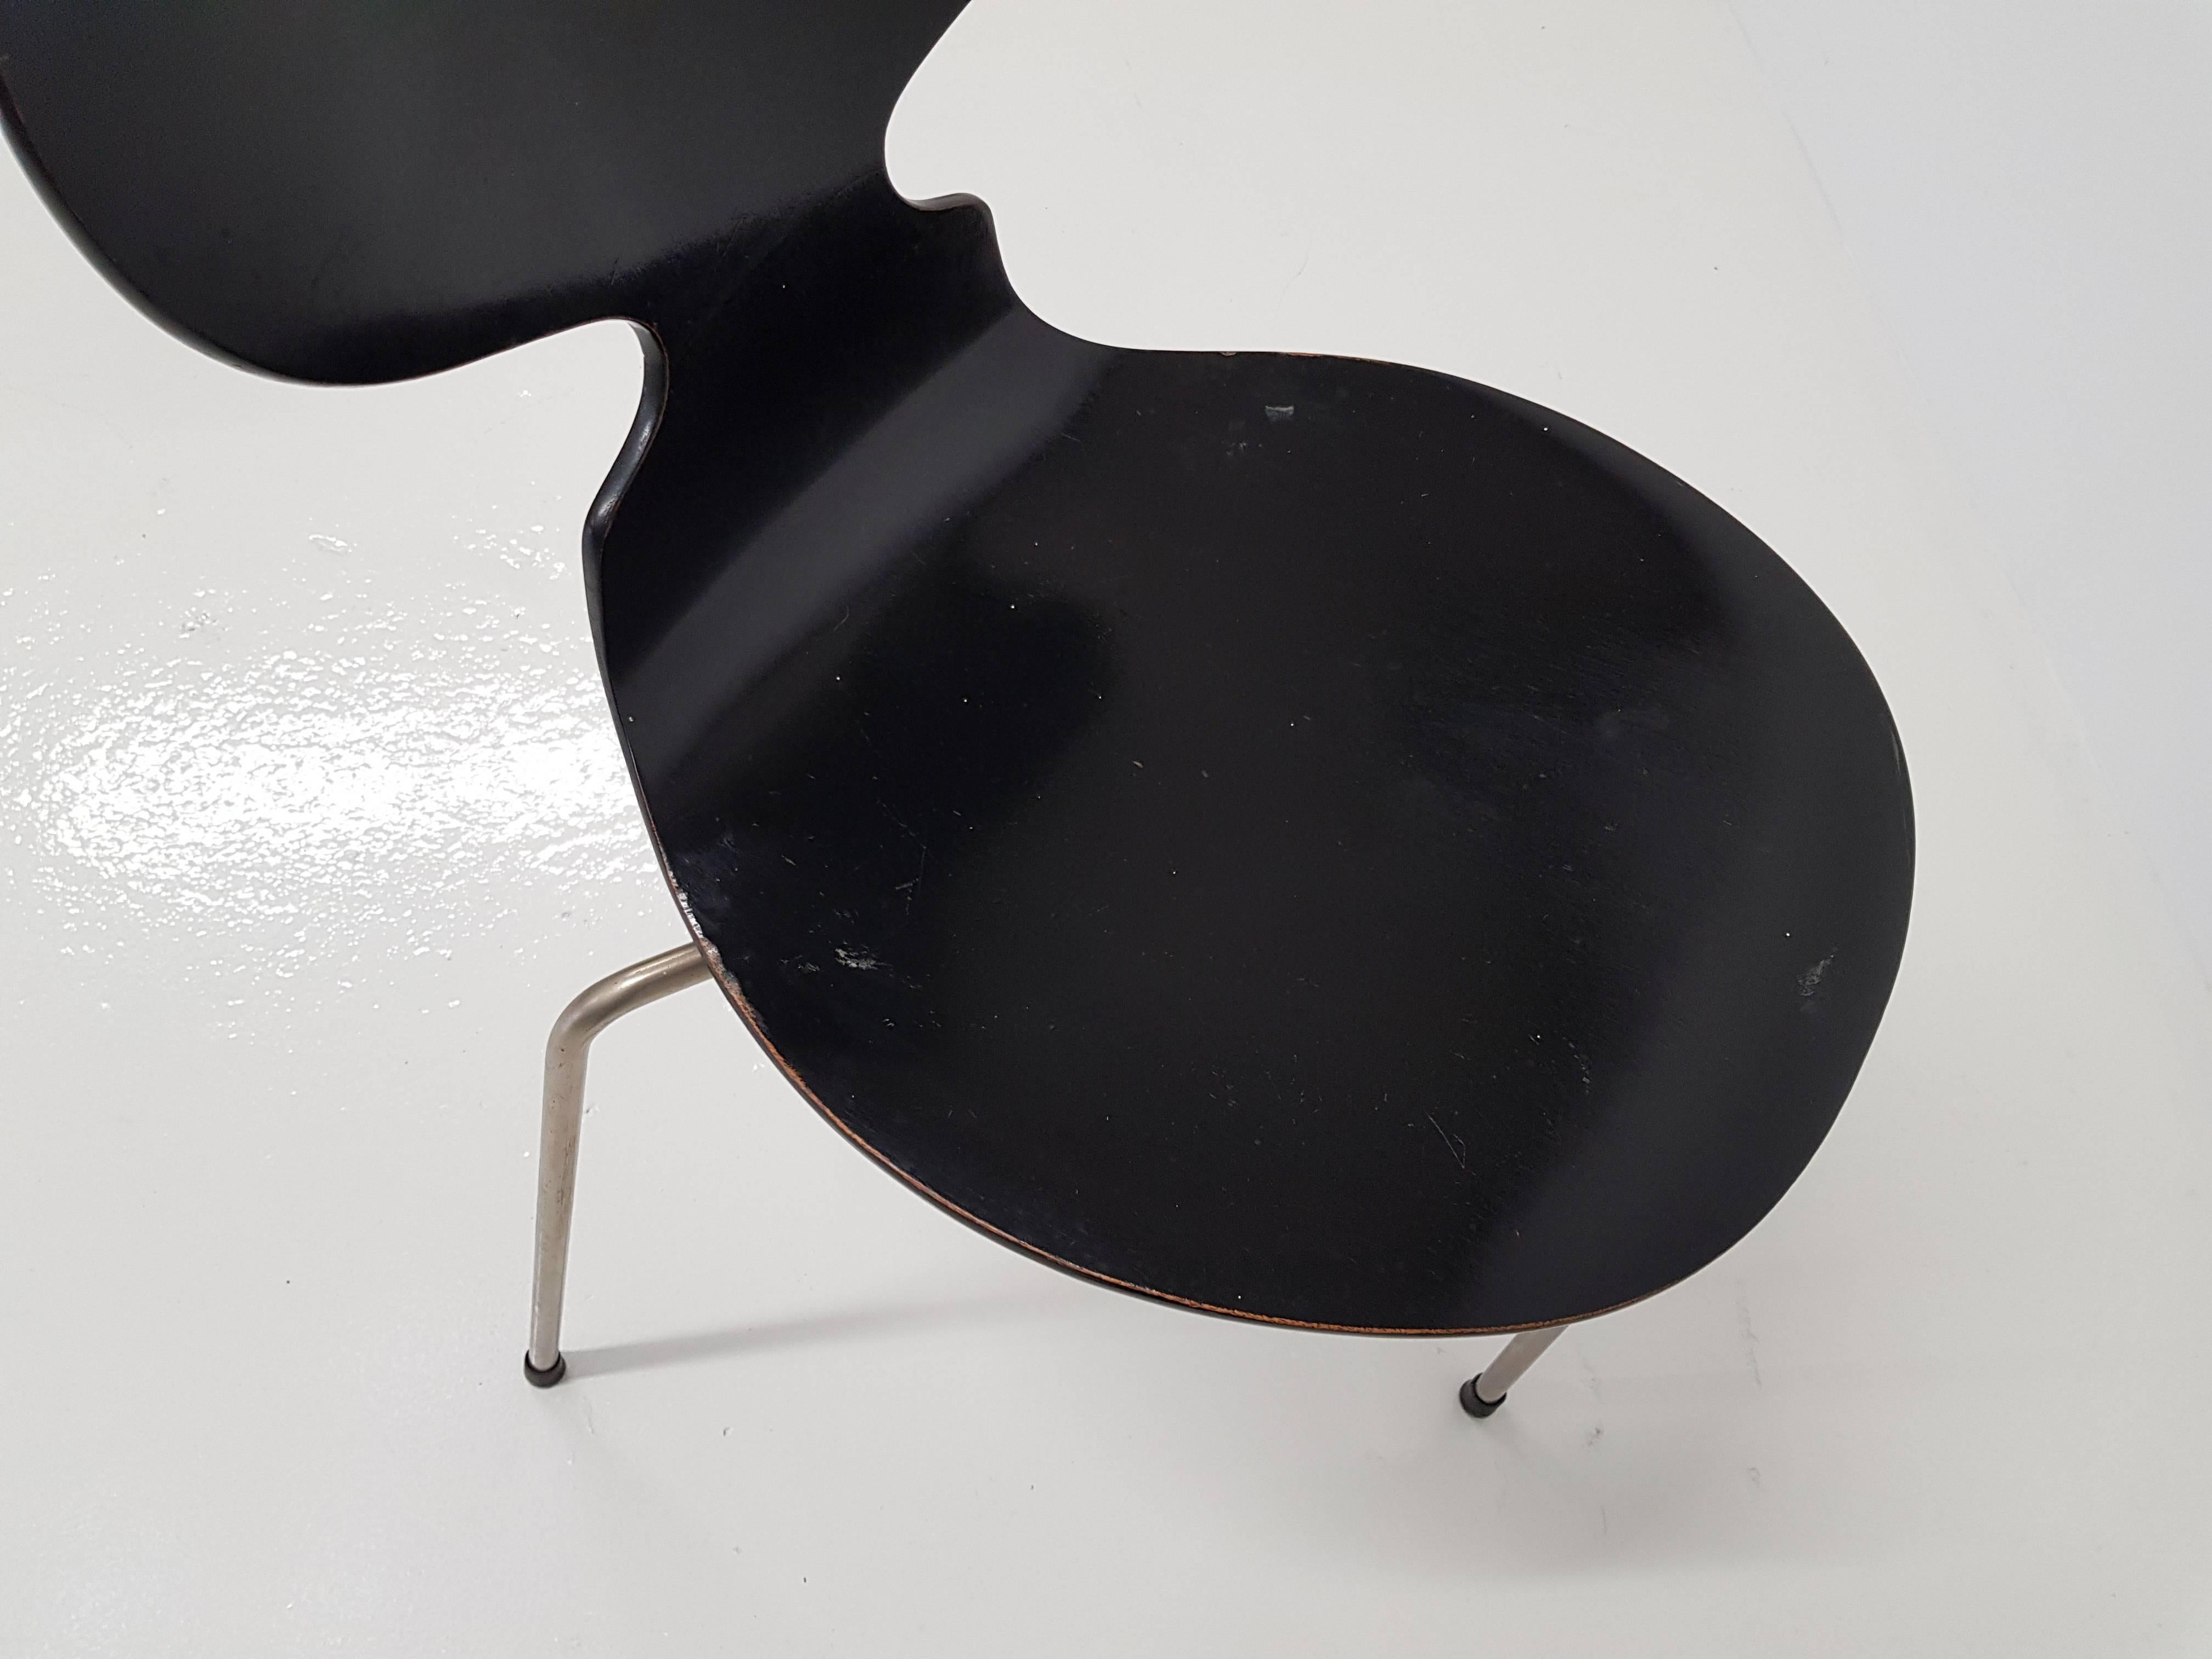 Early Model 3100 'Ant' Chairs by Arne Jacobsen for Fritz Hansen Designed in 1952 5